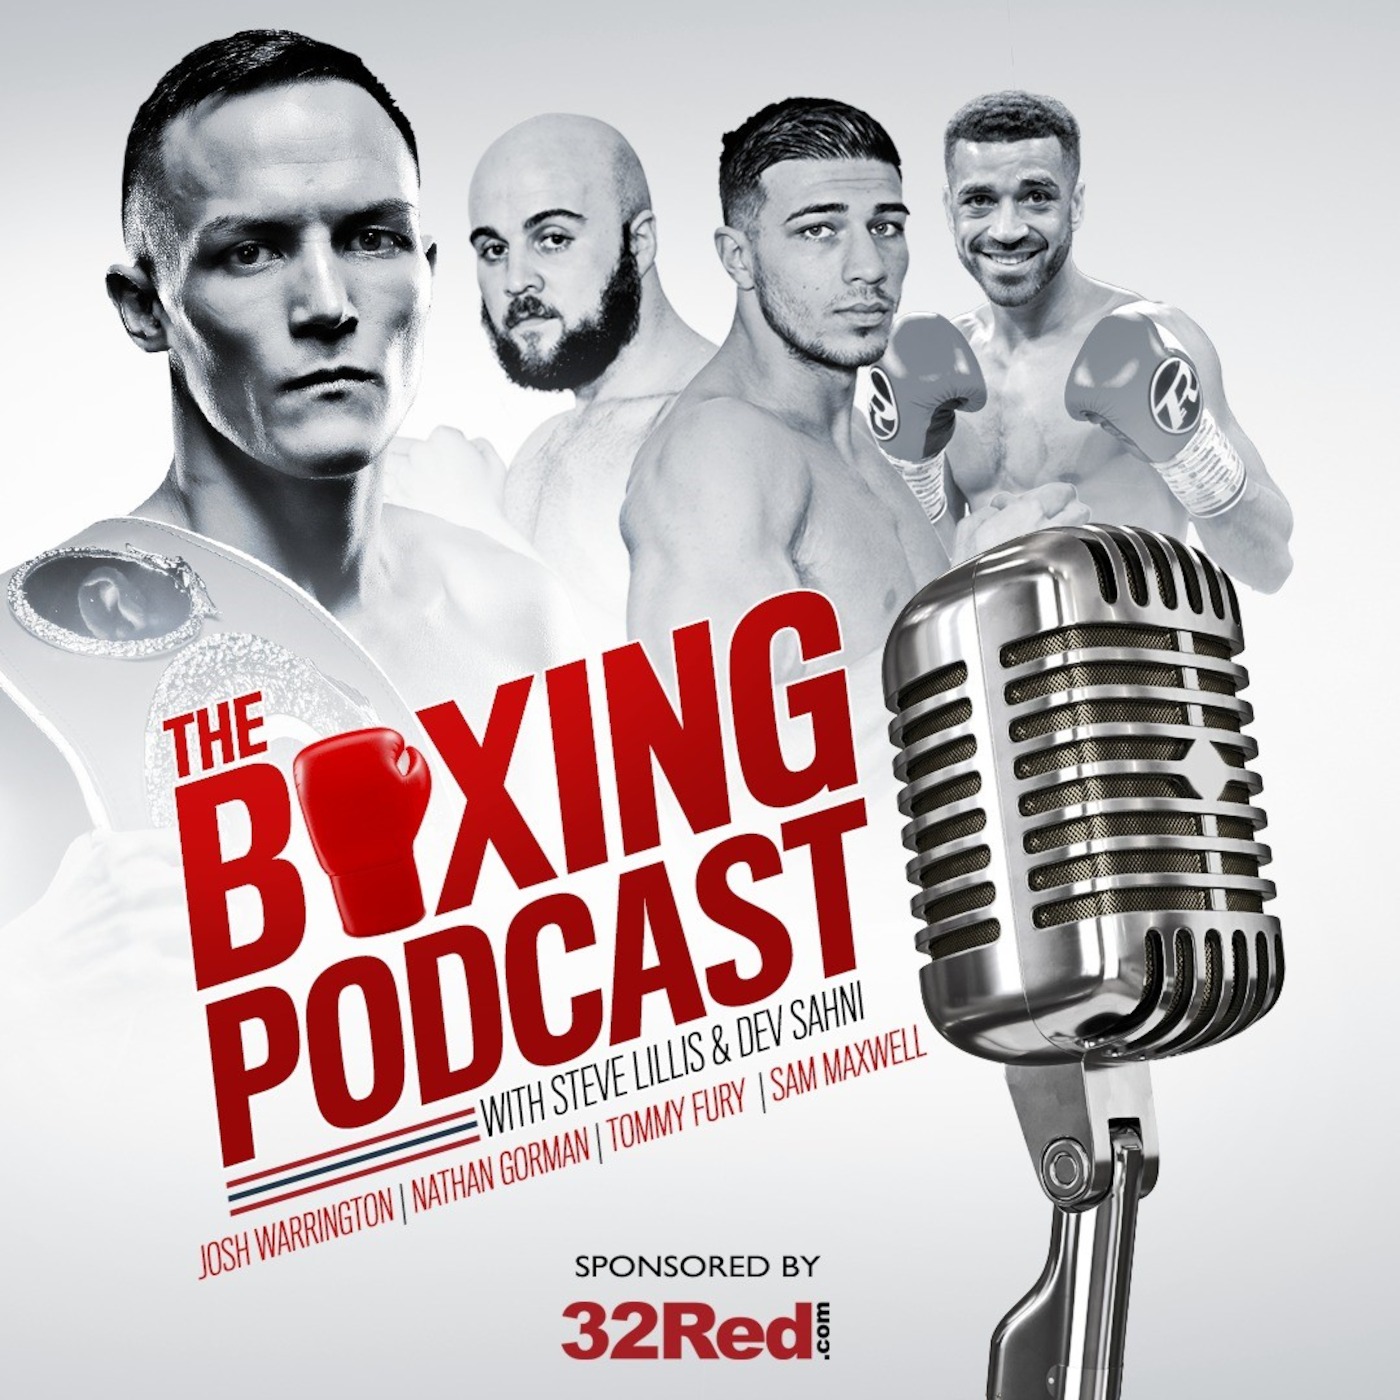 The Boxing Podcast | Episode 5 - Josh Warrington WORLD EXCLUSIVE, Gorman, Tommy Fury, Sam Maxwell